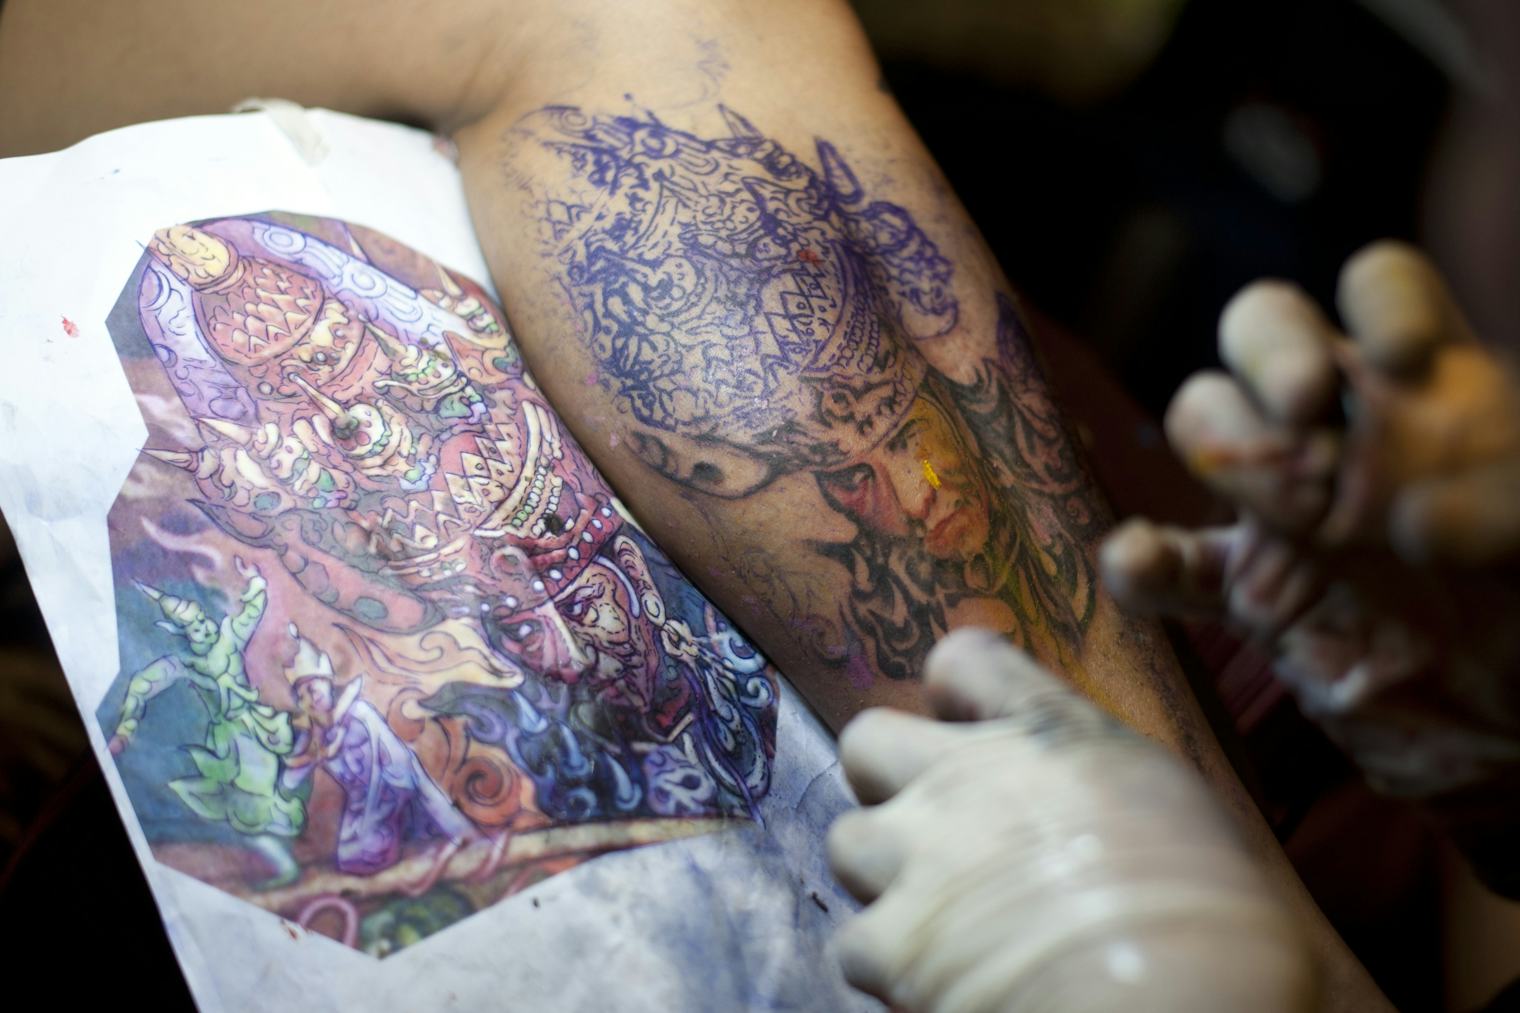 How To Find The Best Spot On Your Body To Get Your First Tattoo